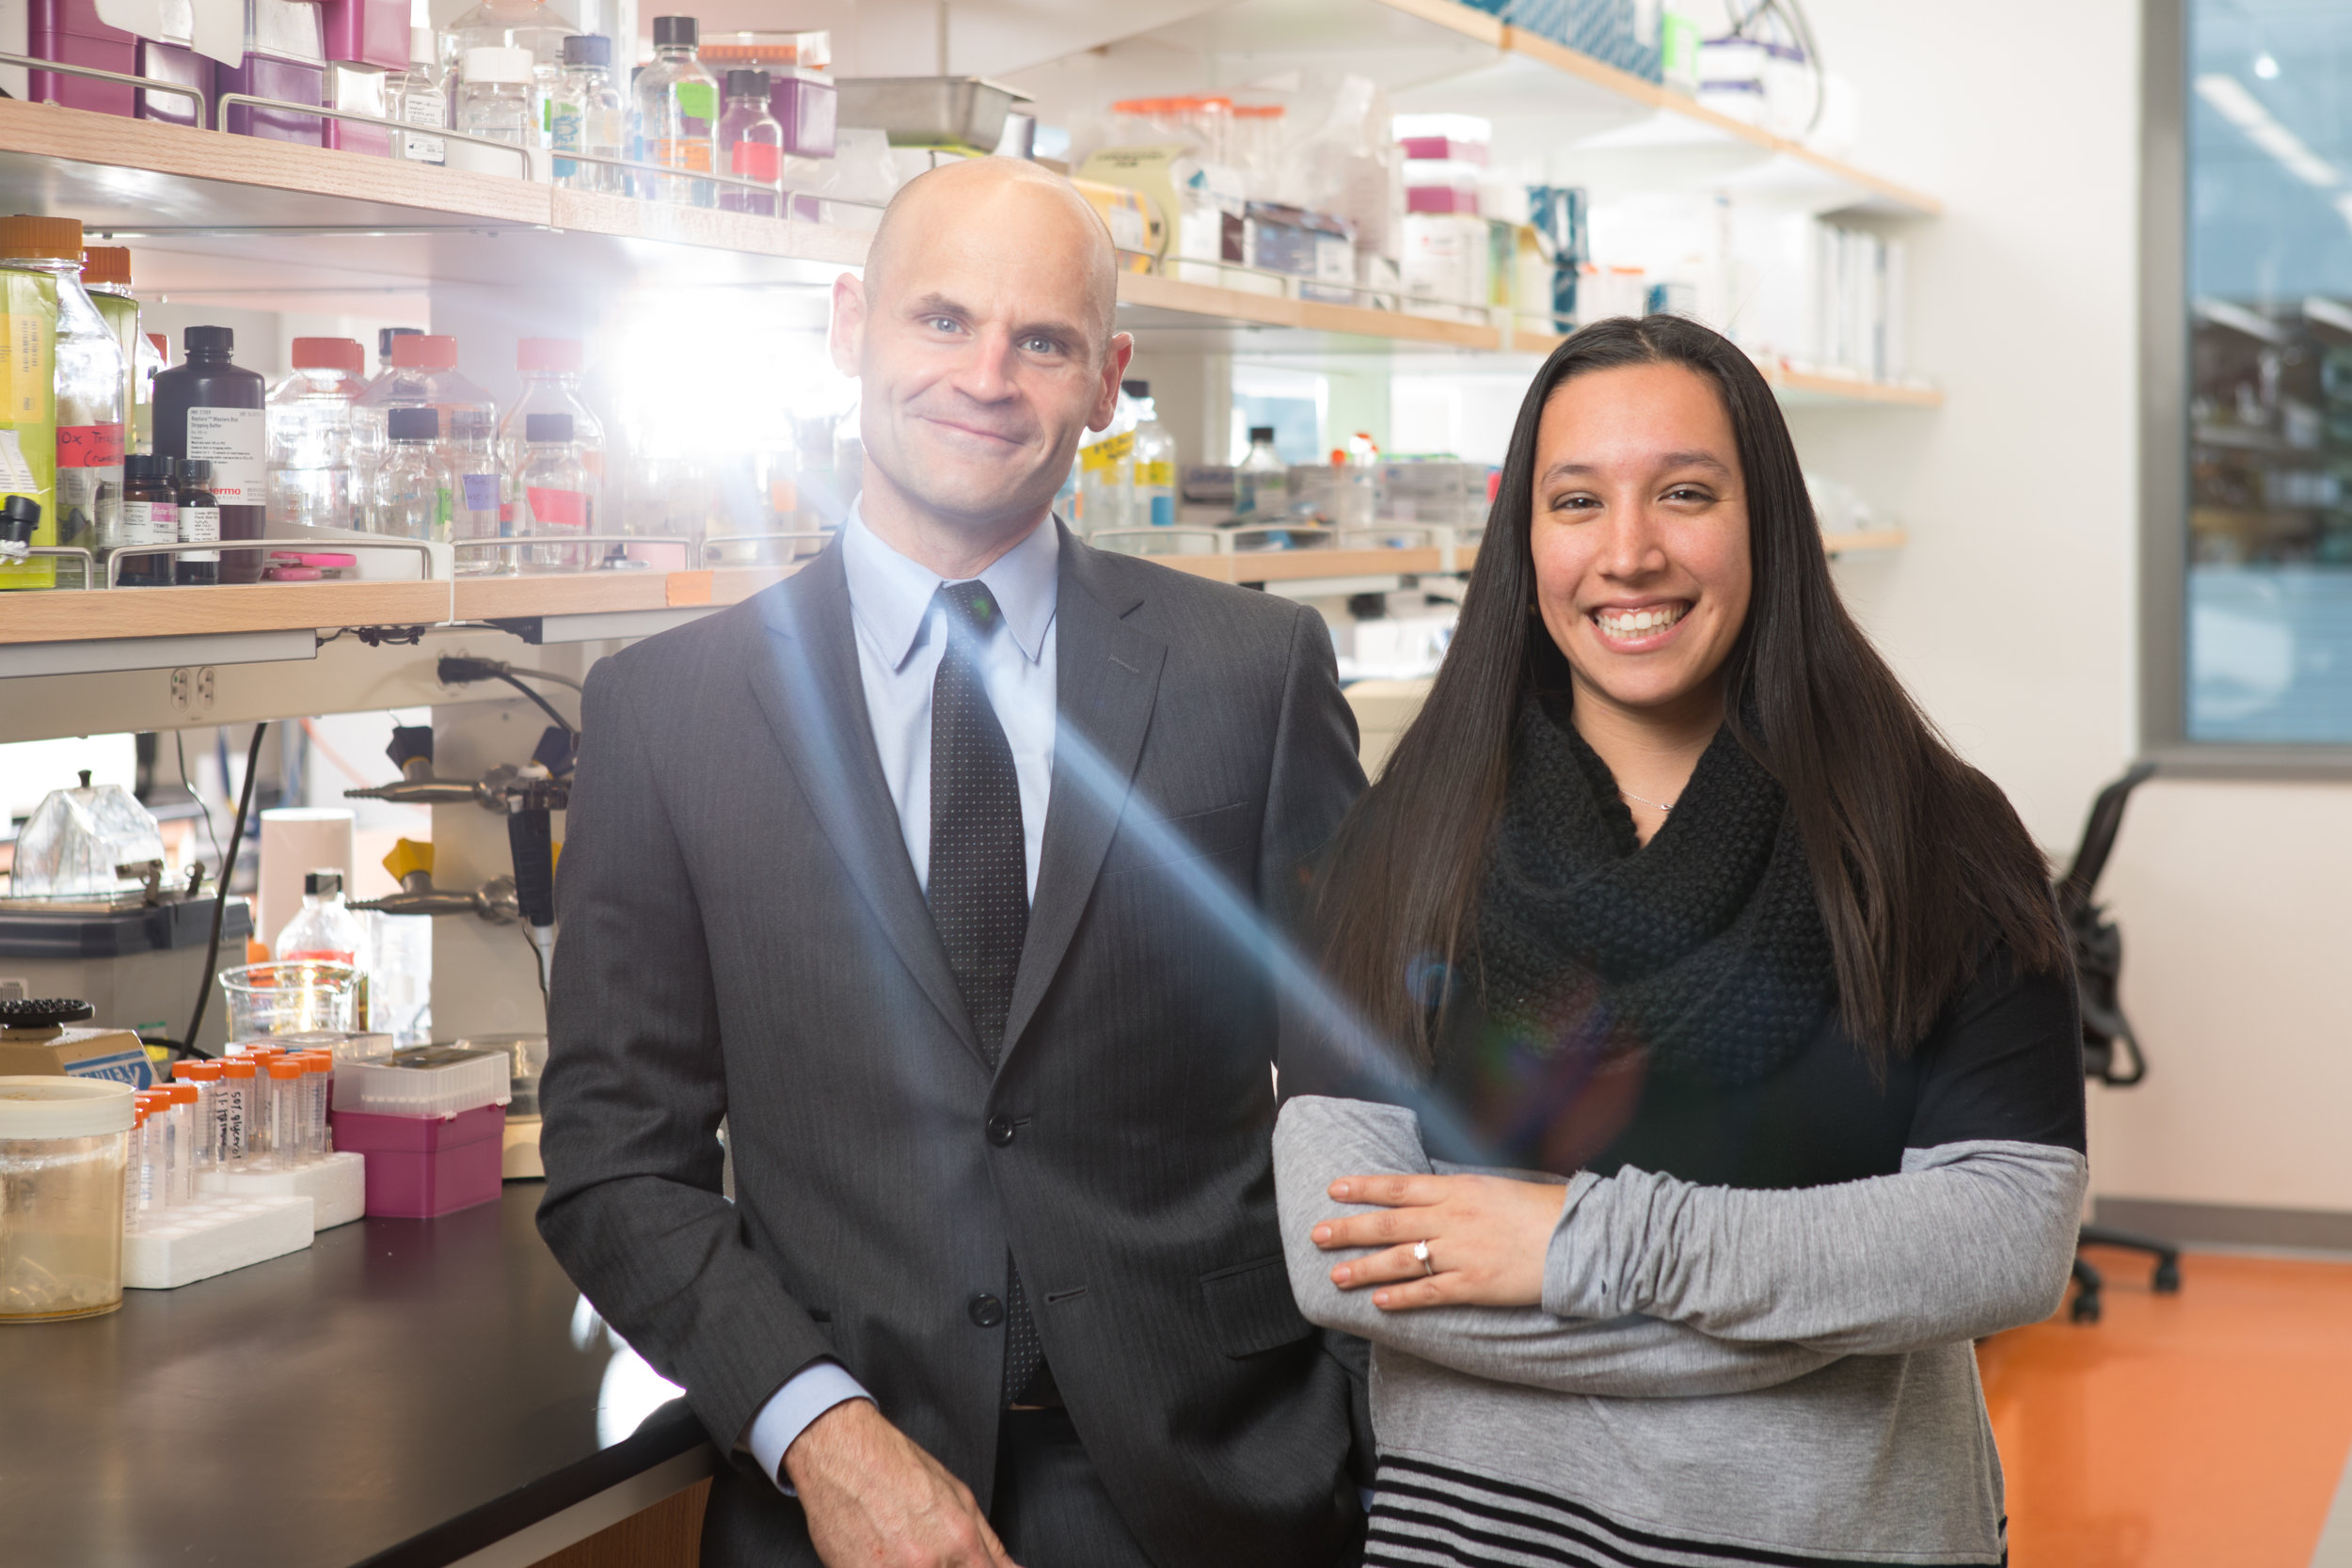  Pharmacology and Toxicology Chair David Dietz and PhD student Jennifer Martin at the Medical School Building  